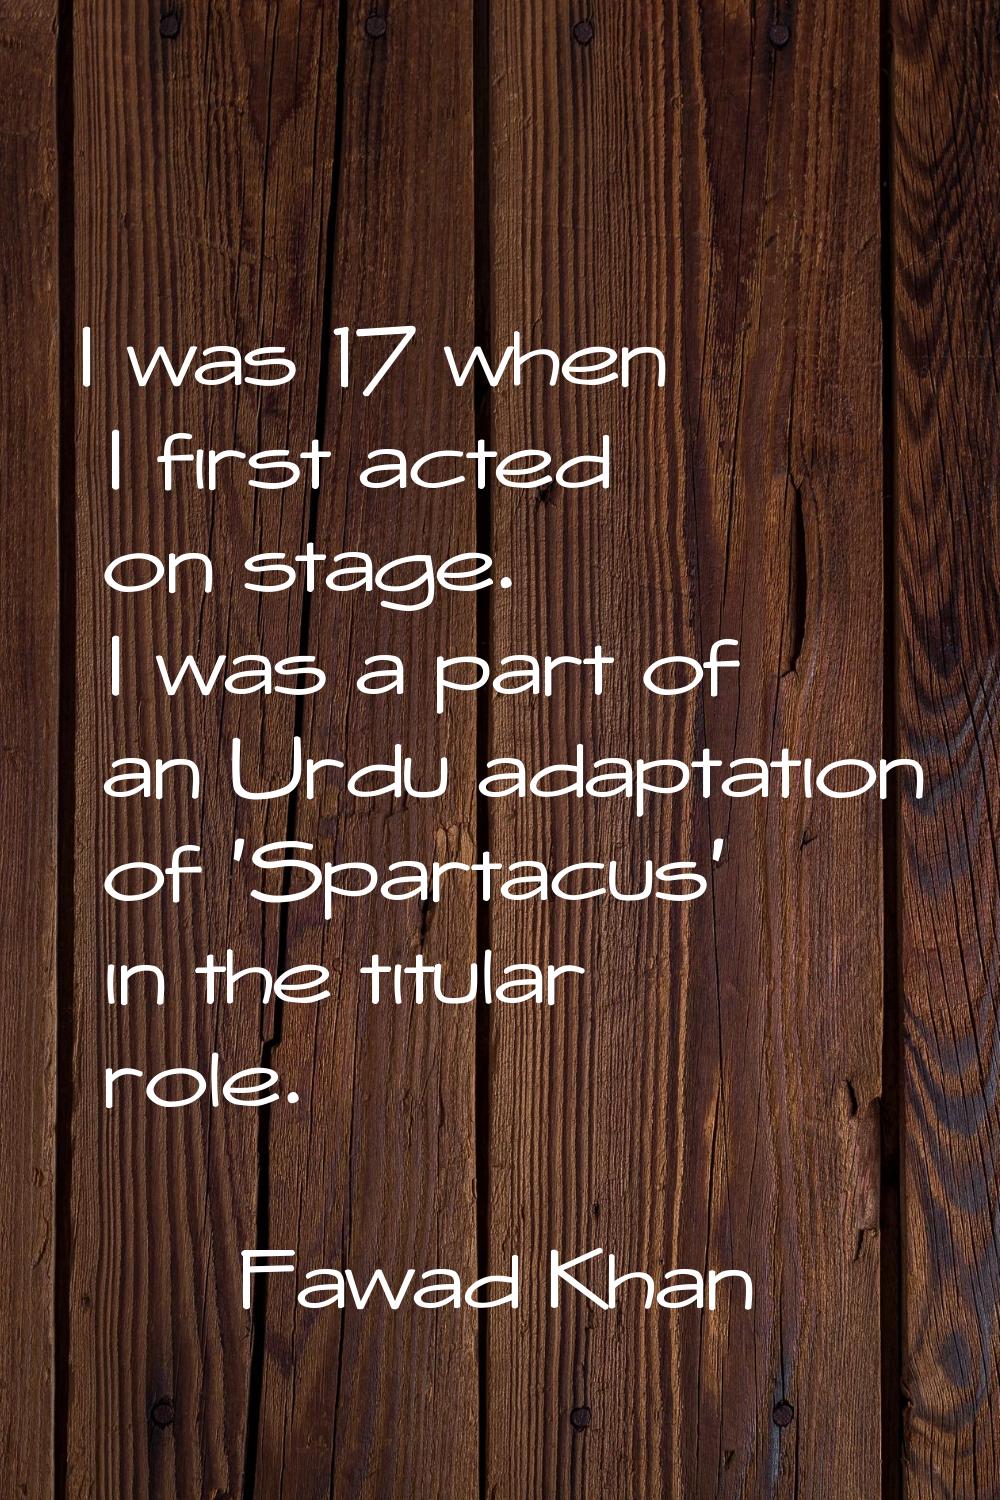 I was 17 when I first acted on stage. I was a part of an Urdu adaptation of 'Spartacus' in the titu